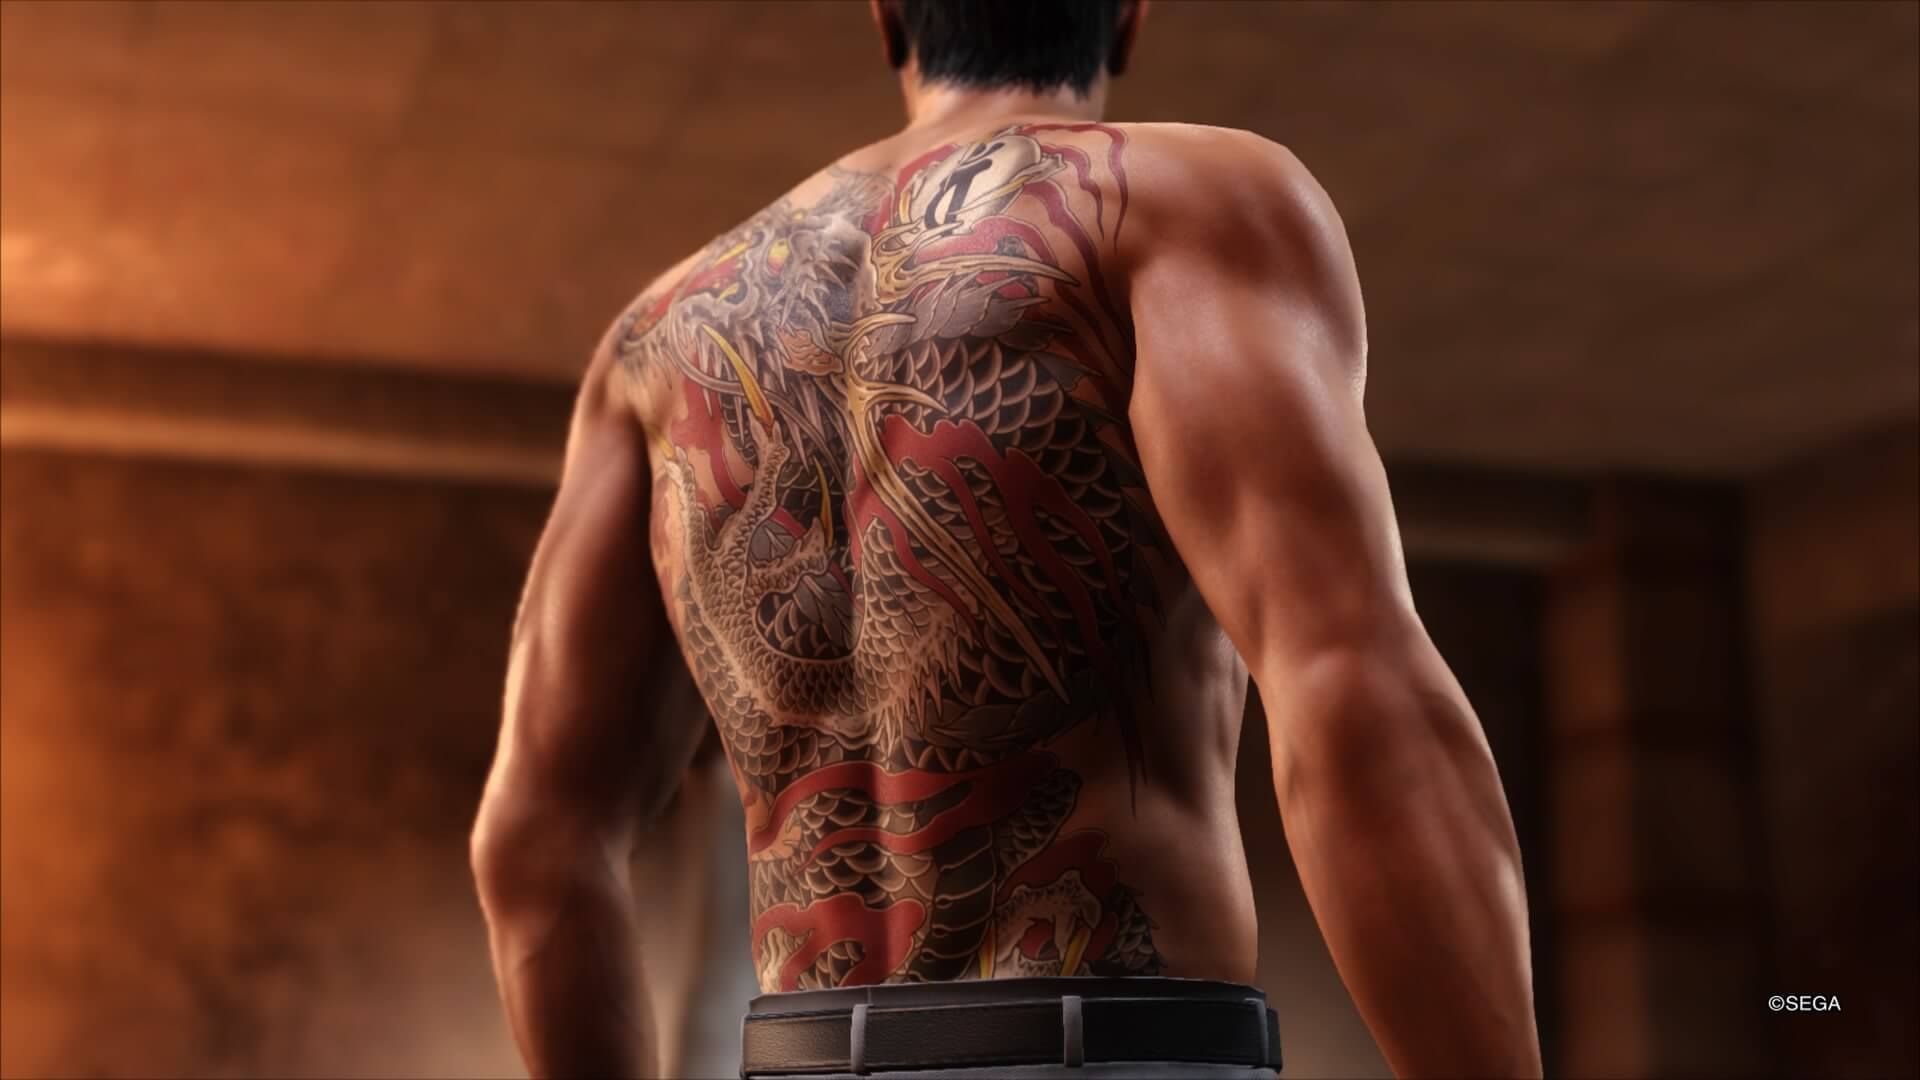 More Tattooed Protagonists Please